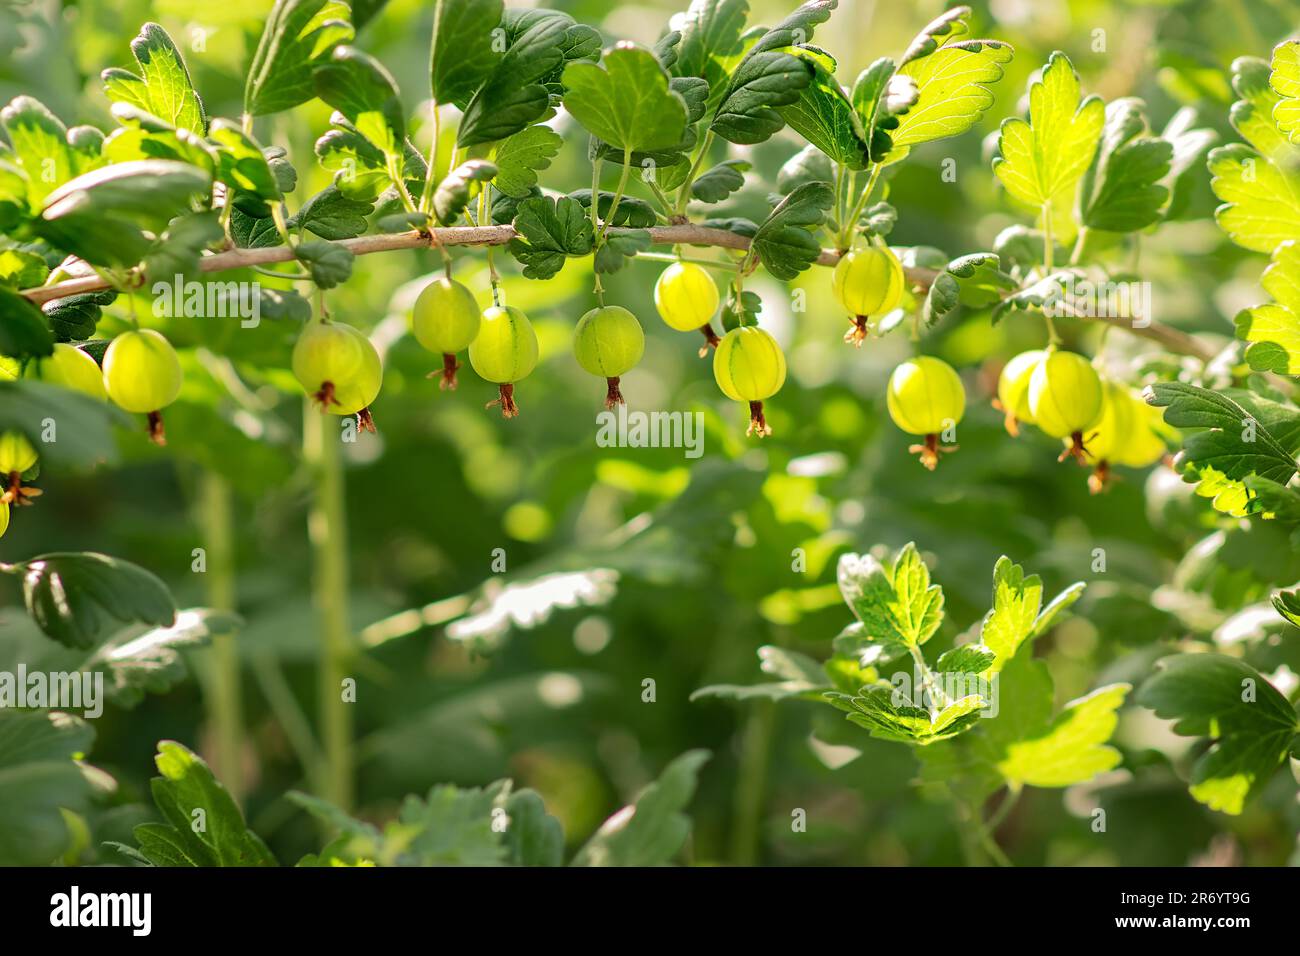 a beautiful and green gooseberry bush,berries shimmer on a branch in the rays of the sun,like a string of large green beads,a beautiful country garden Stock Photo